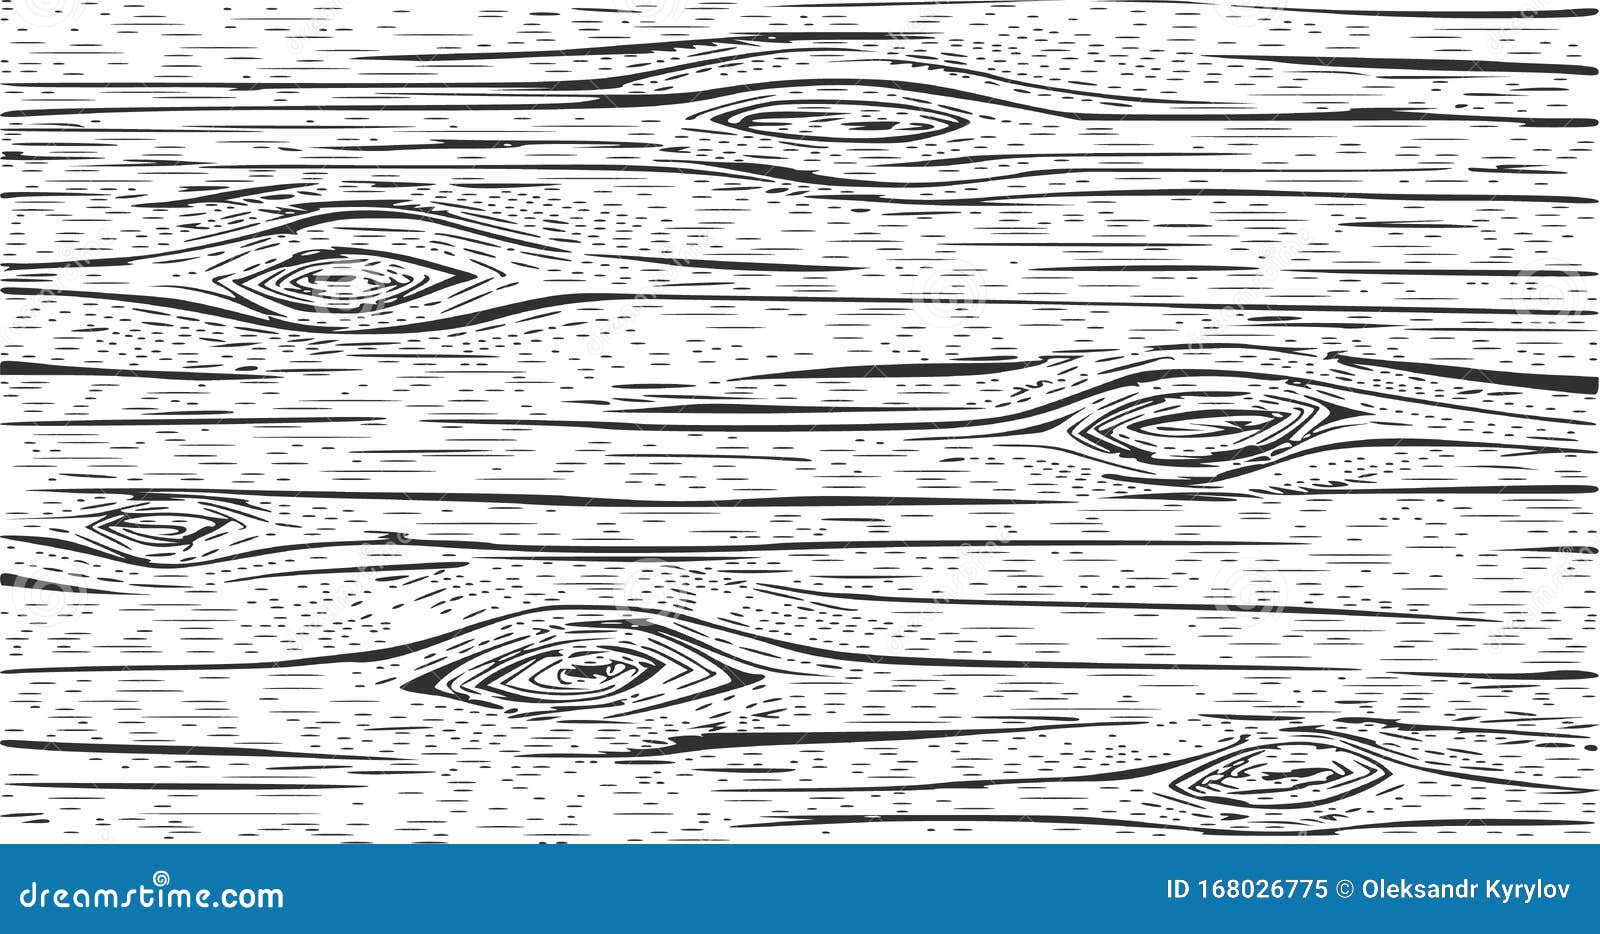 Wood cut, wood for design patterns, frames, backgrounds, for Russian bath  for body hygiene. Set of accessories for bath, sauna. Hand drawing in sketch  style. Isolated object on white background.:: tasmeemME.com